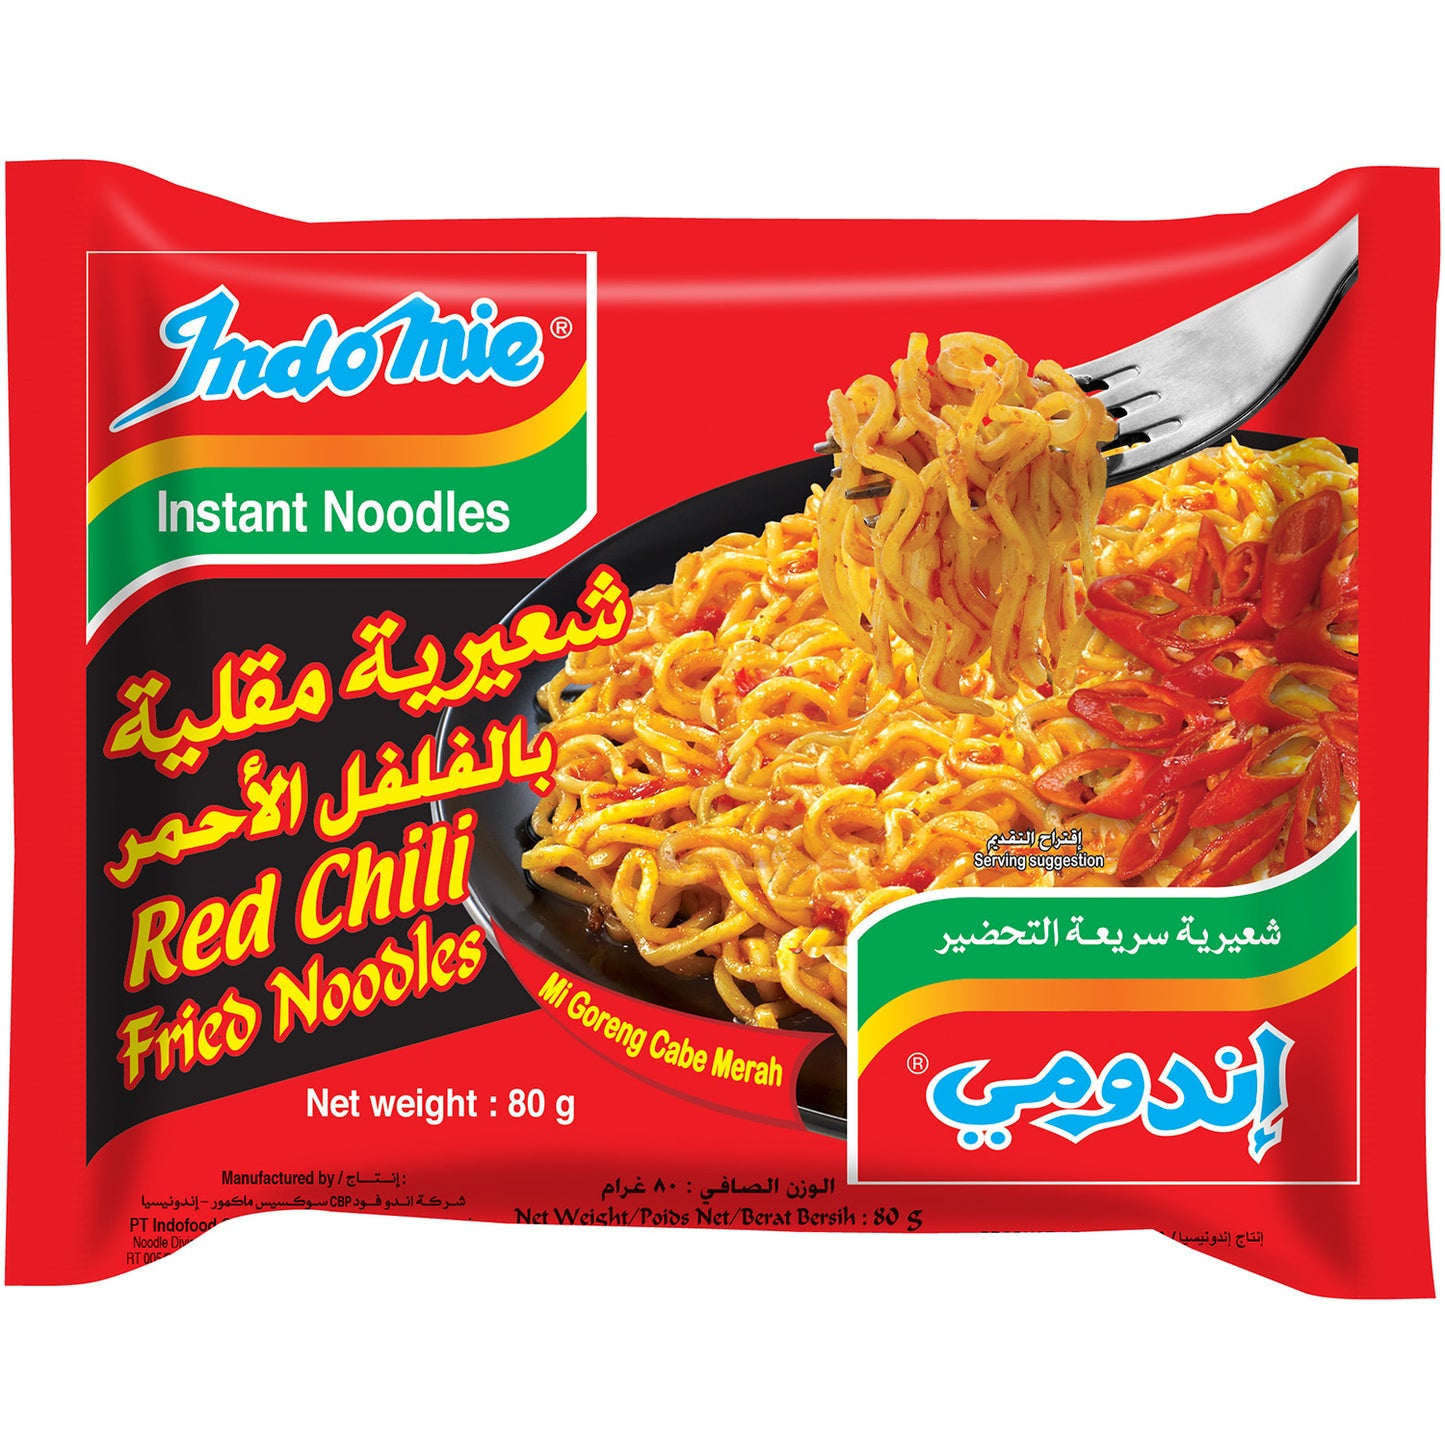 Indomie Red Chili Fried Noodles with Seasoning Powder and Sauce  - 5 Packs Each 80g